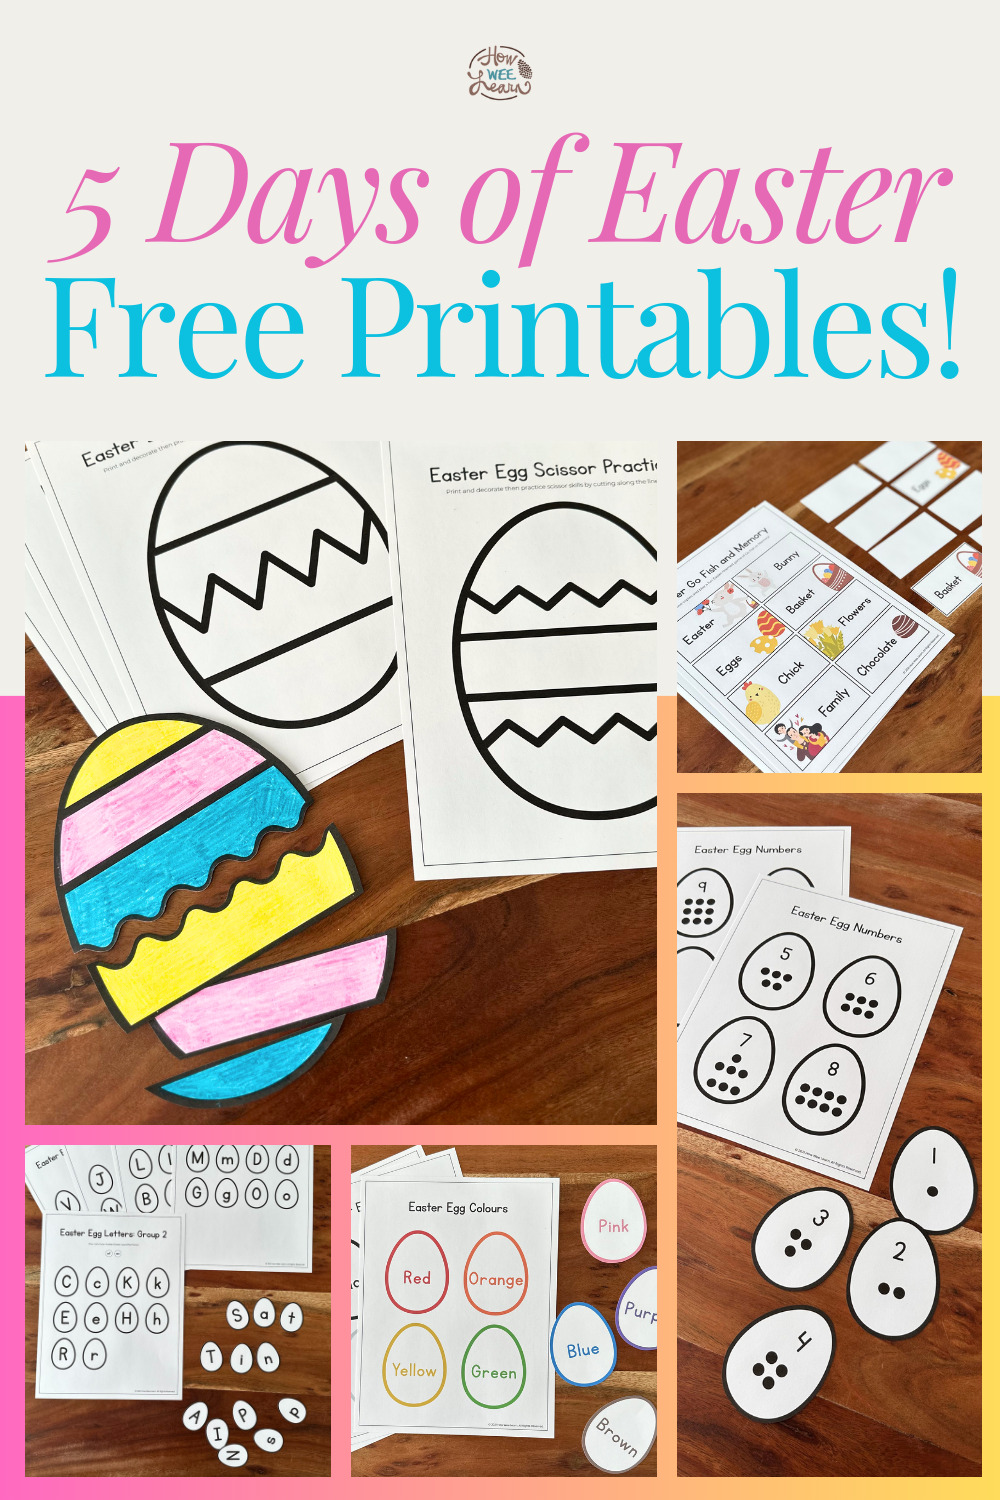 5 Days of Easter Printables